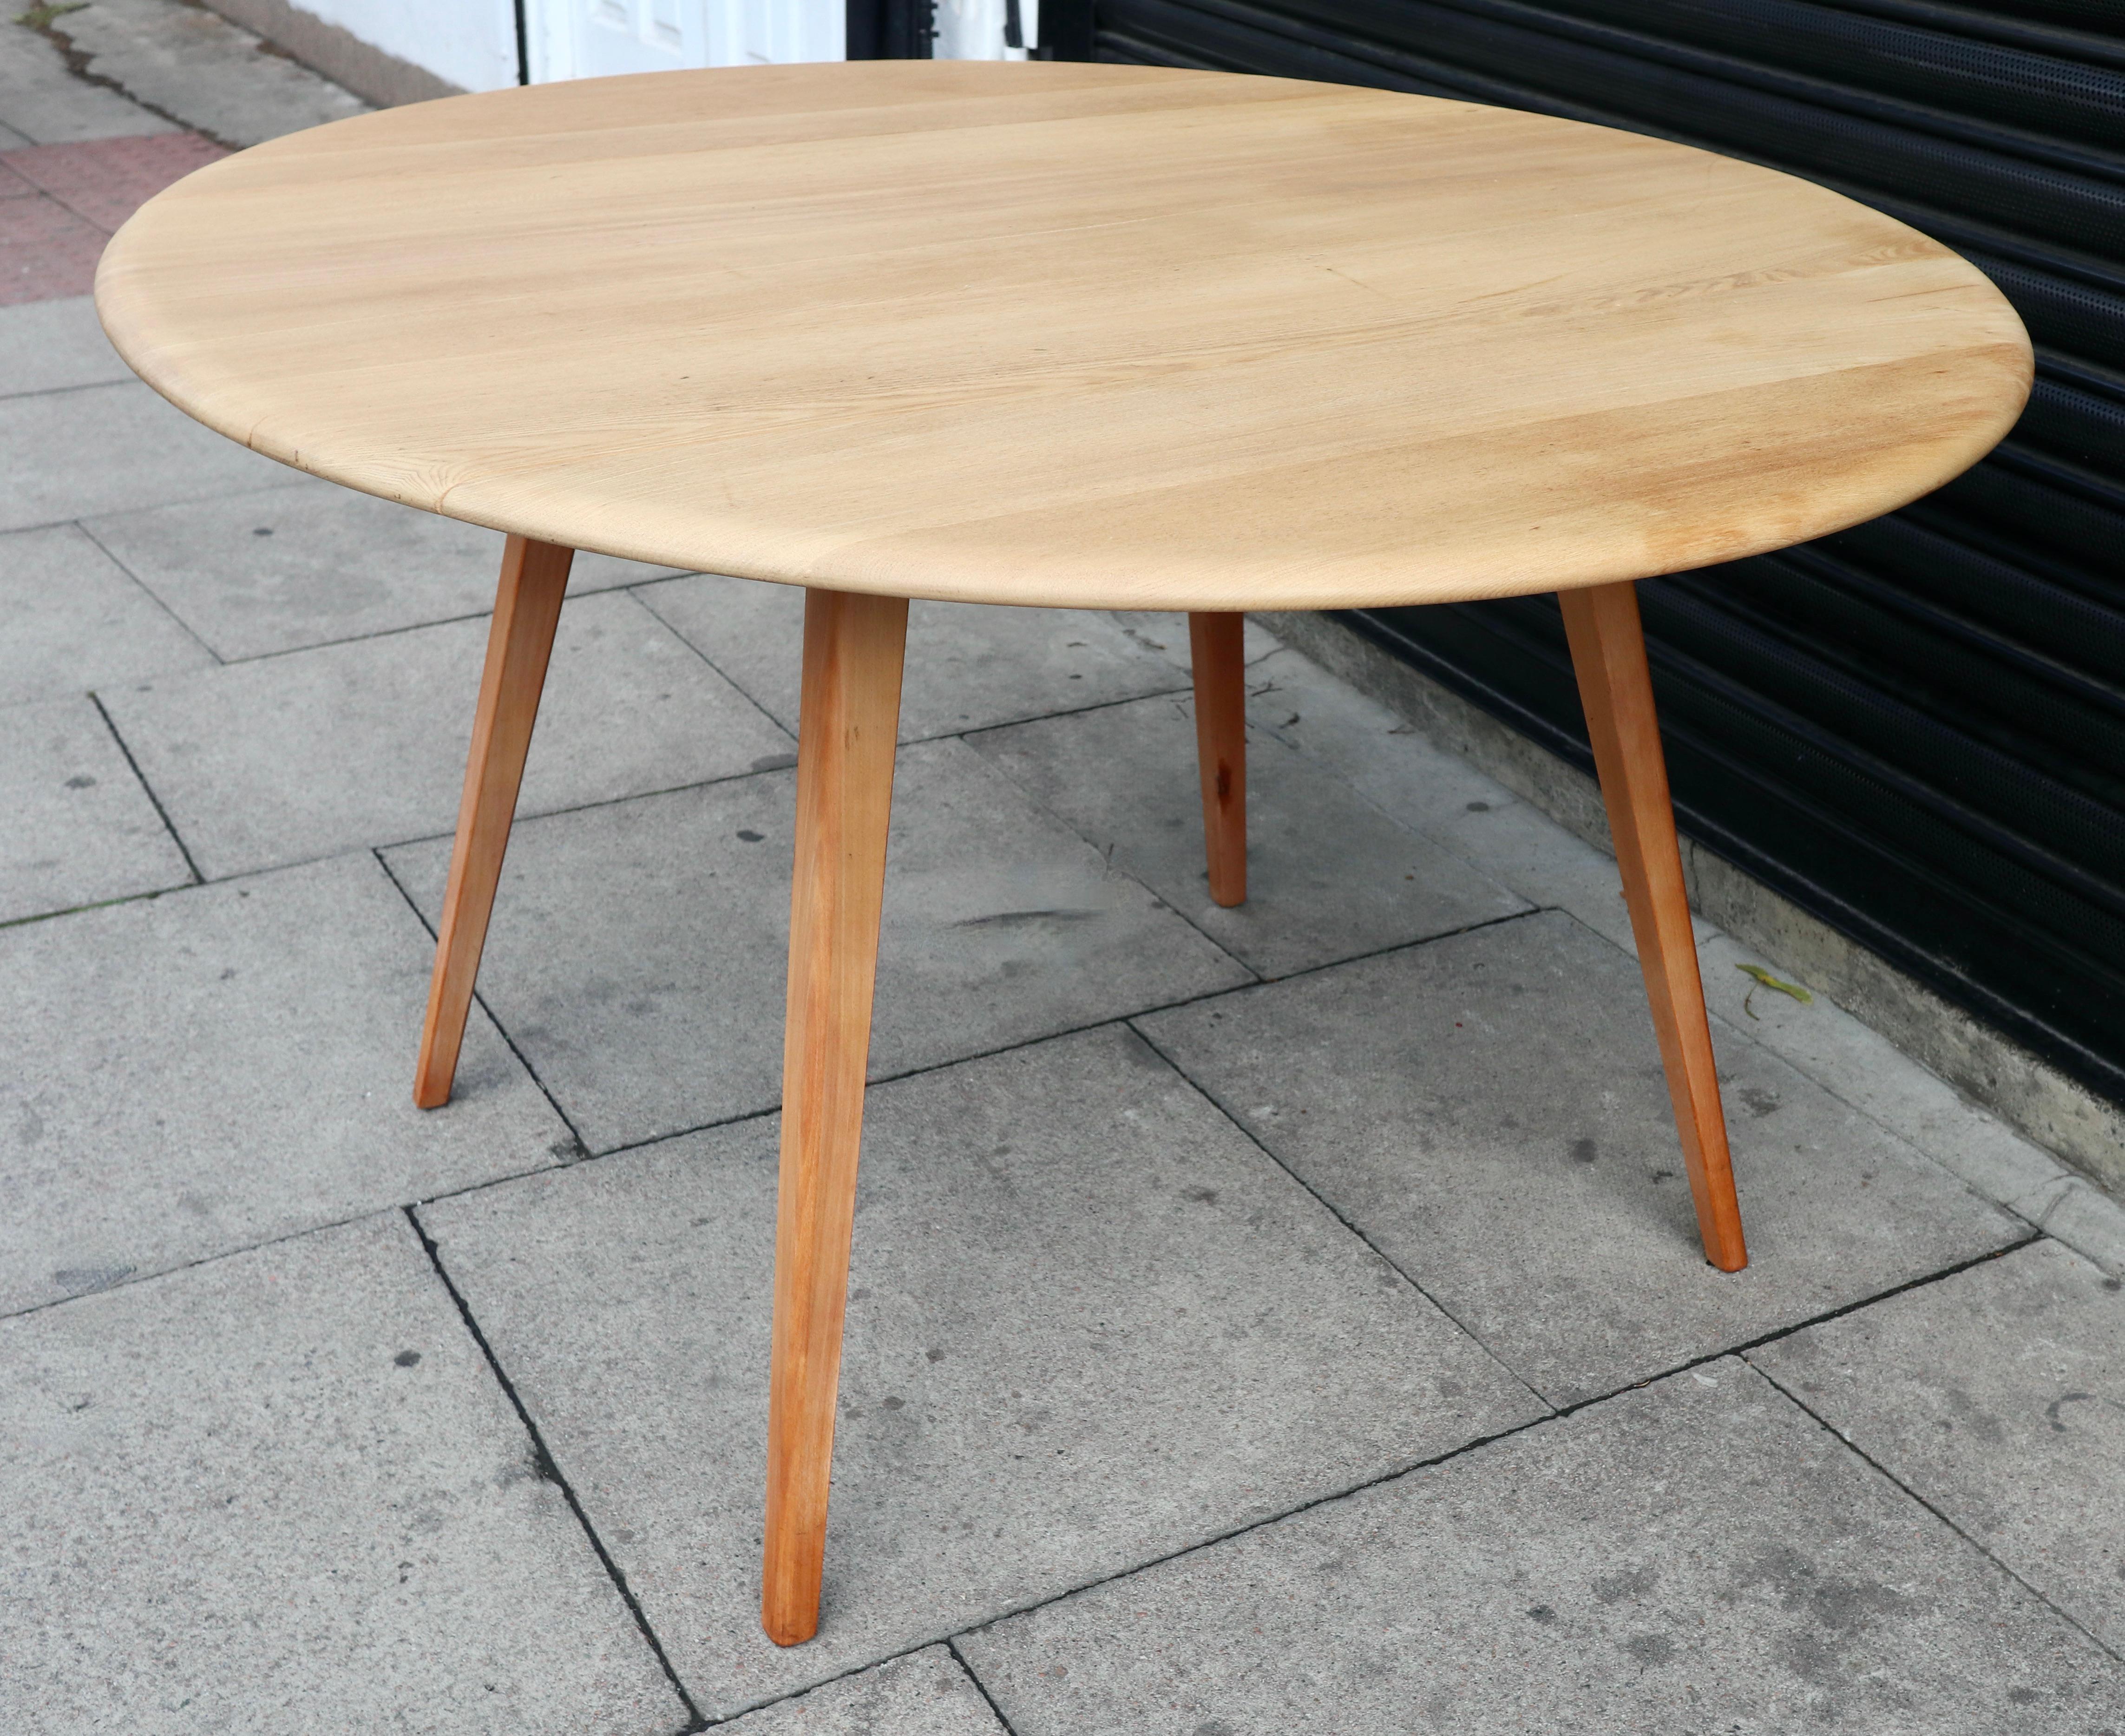 A vintage 1960s drop leaf ercol round/oval dining table.  This table has a solid Elmwood top and a four legged solid Beech base. It has two drop leaves and is very good vintage condition, having been completely refurbished and refinished.